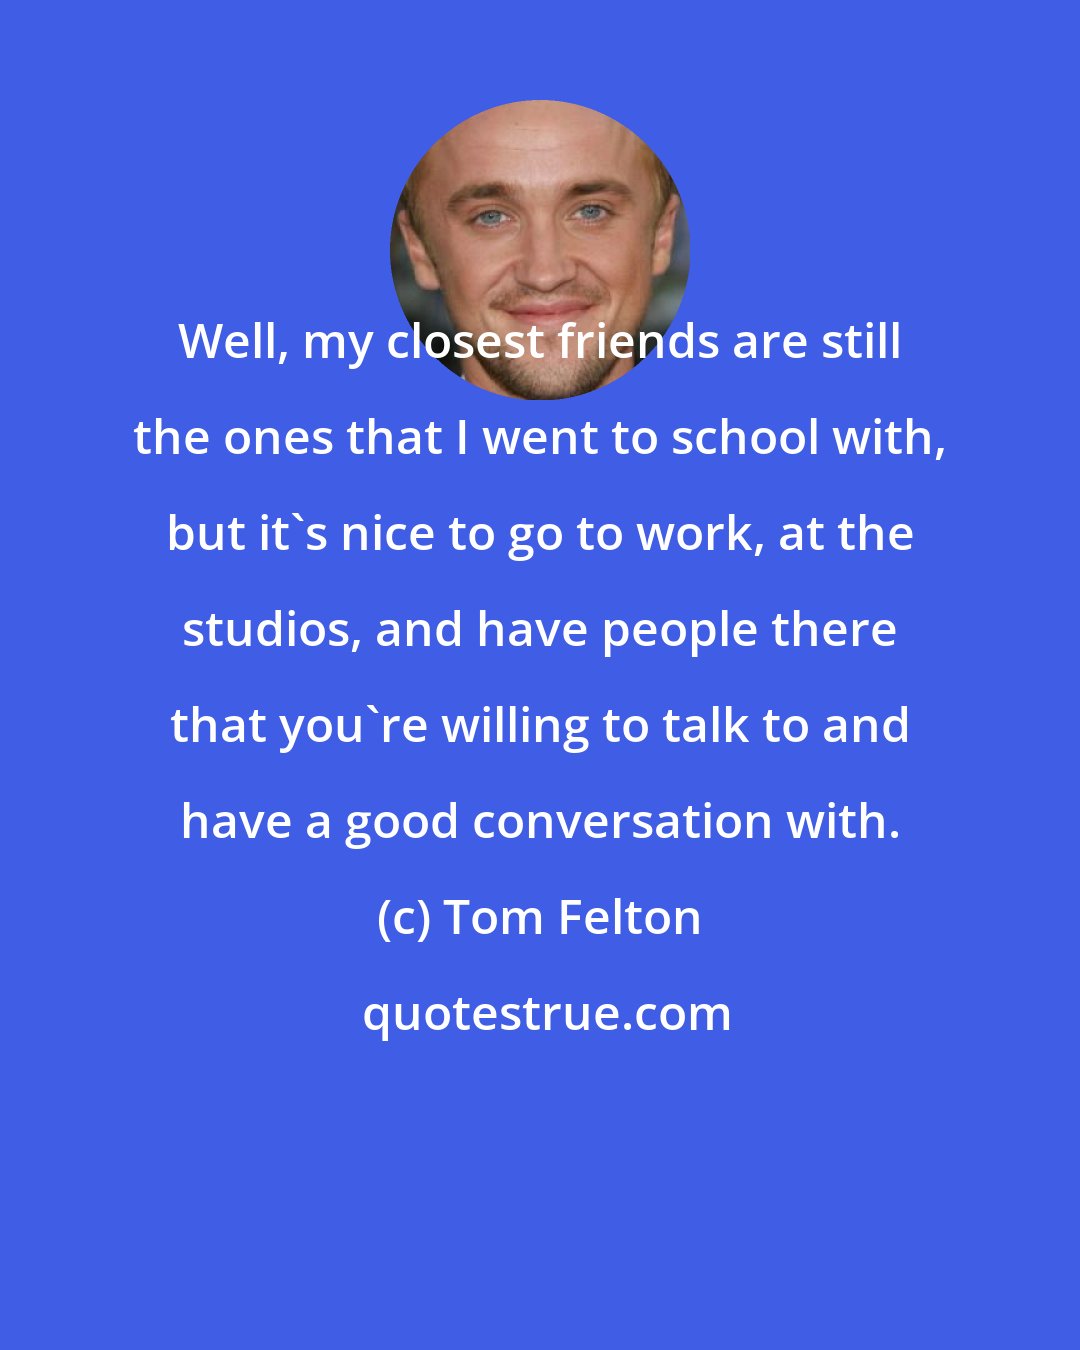 Tom Felton: Well, my closest friends are still the ones that I went to school with, but it's nice to go to work, at the studios, and have people there that you're willing to talk to and have a good conversation with.